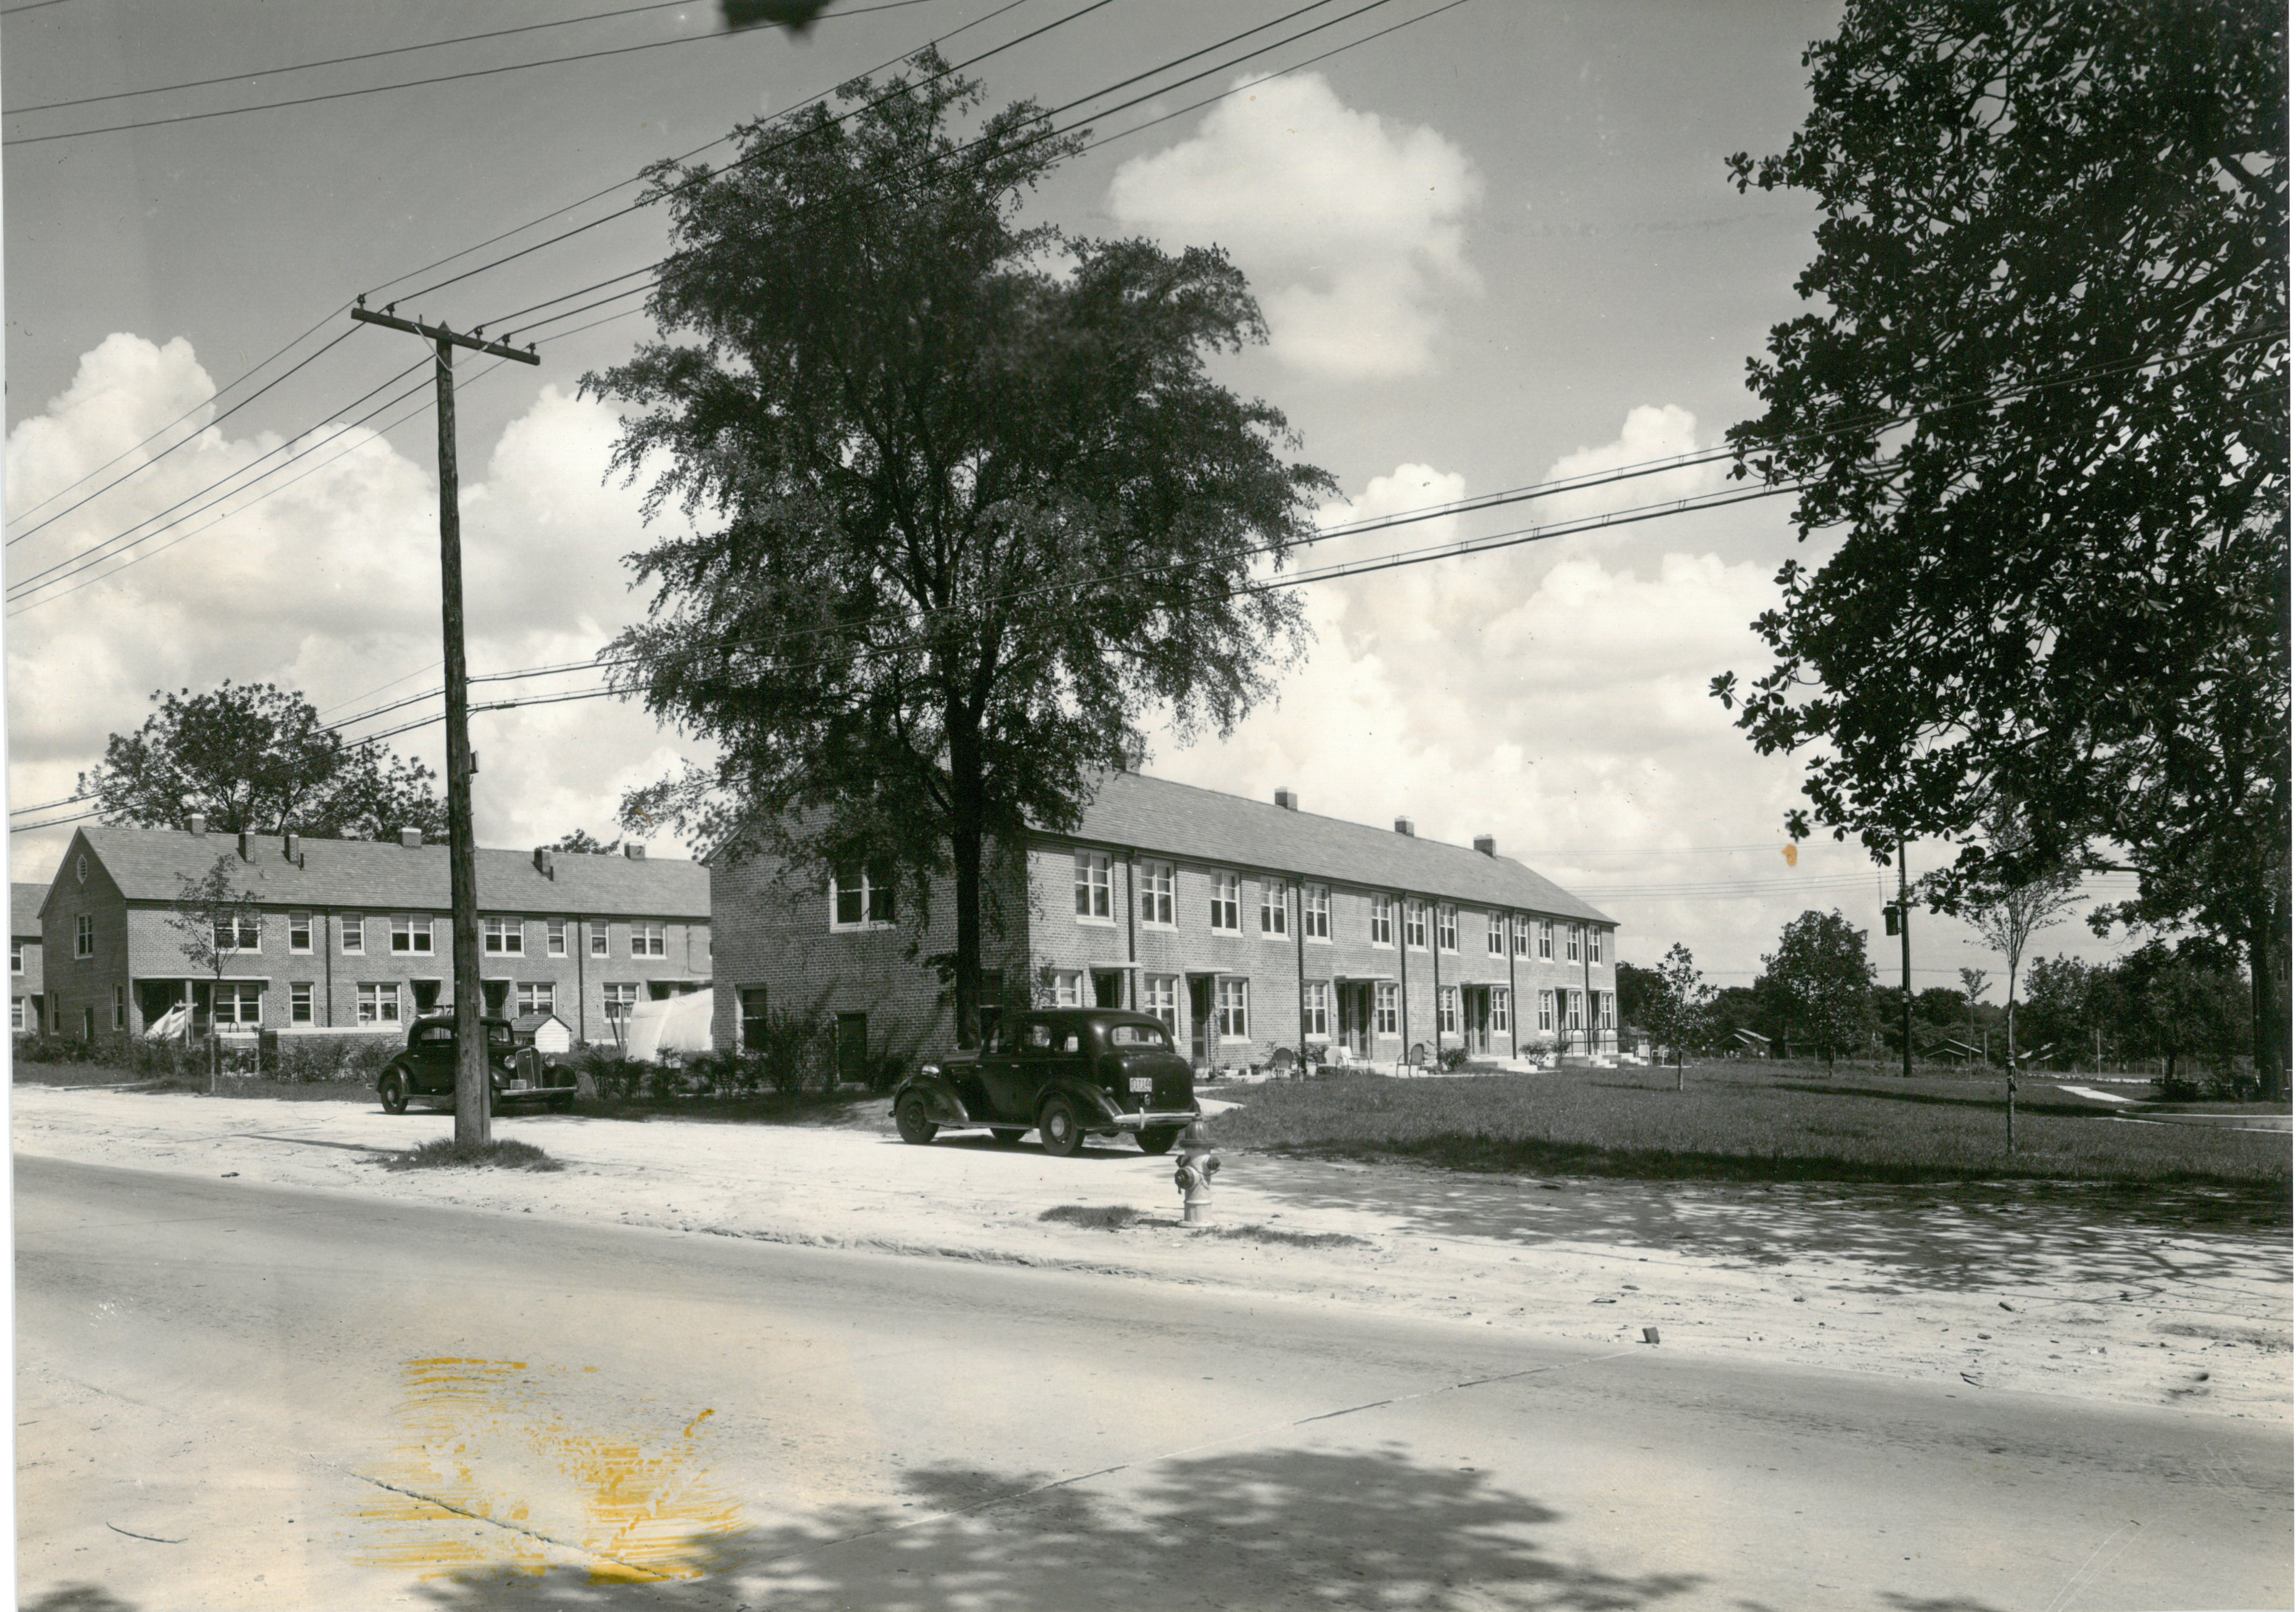 Gonzales Gardens, built between 1938 and 1940, was demolished in 2016 after 70 years. Named after the Gonzales brothers who founded The State newspaper in 1891, it was one of two public housing projects built by the Columbia Housing Authority.